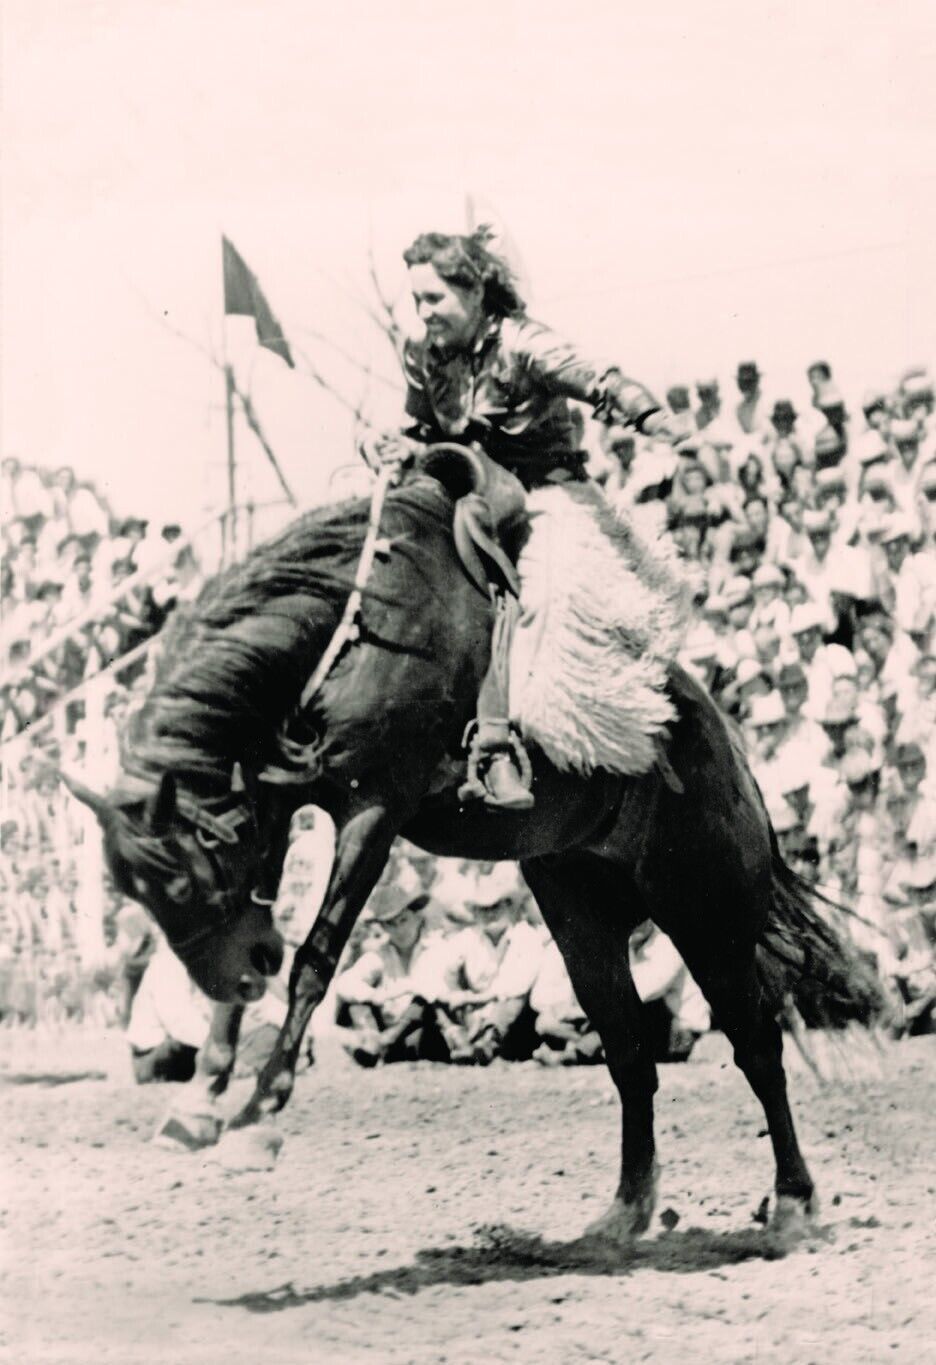 8 Seconds Bronc ridiing Rodeo COWGIRL vintage 8 x 10  photo retro